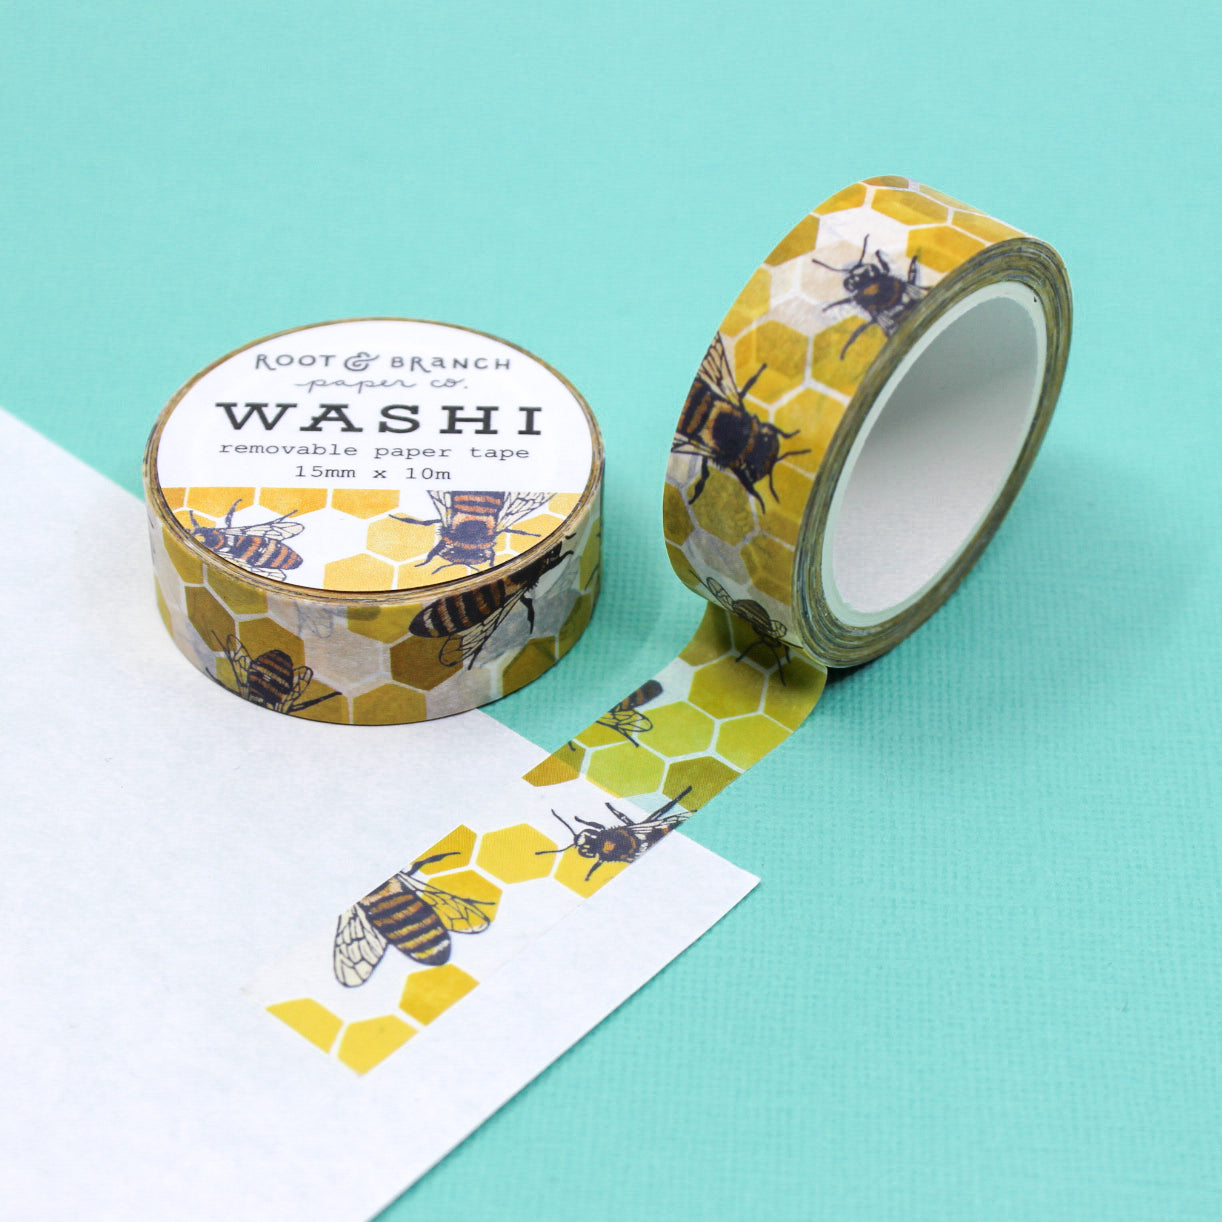 Capture nature's beauty with 'Honeybee on Yellow Hexagon Honeycomb' Washi Tape, a delightful tape featuring a charming honeybee against a vibrant hexagon honeycomb backdrop. This tape is from Root & Branch Co. and sold at BBB Supplies Craft Shop.